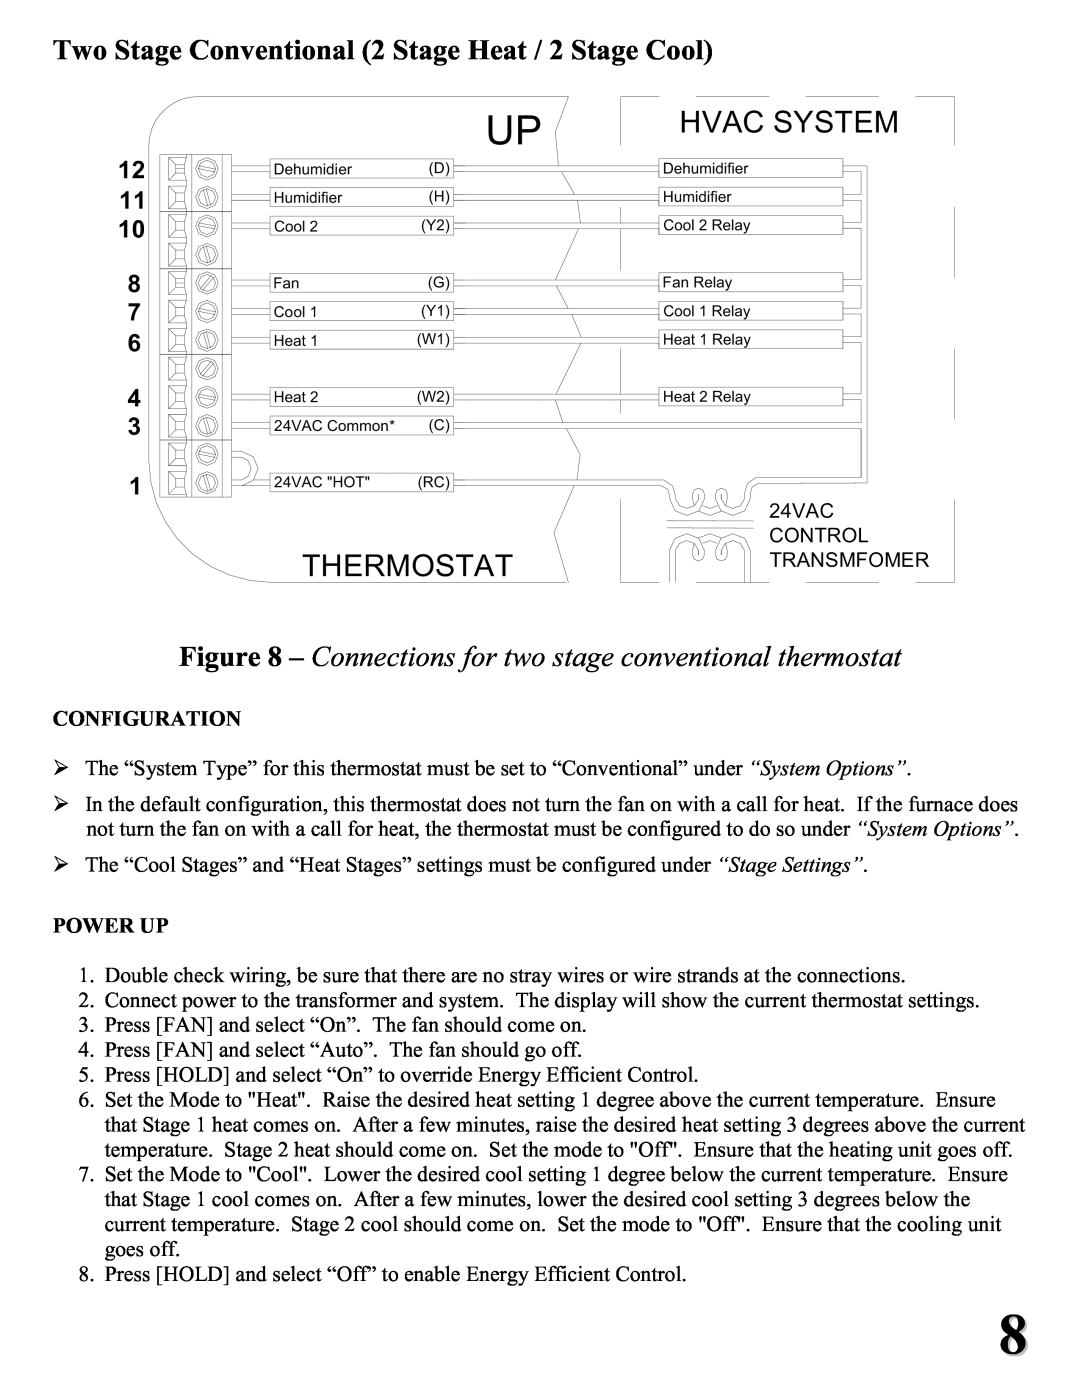 Home Automation RC-2000 installation instructions 12 11 10 8 7 6 4, Hvac System, Thermostat, Dehumidier 